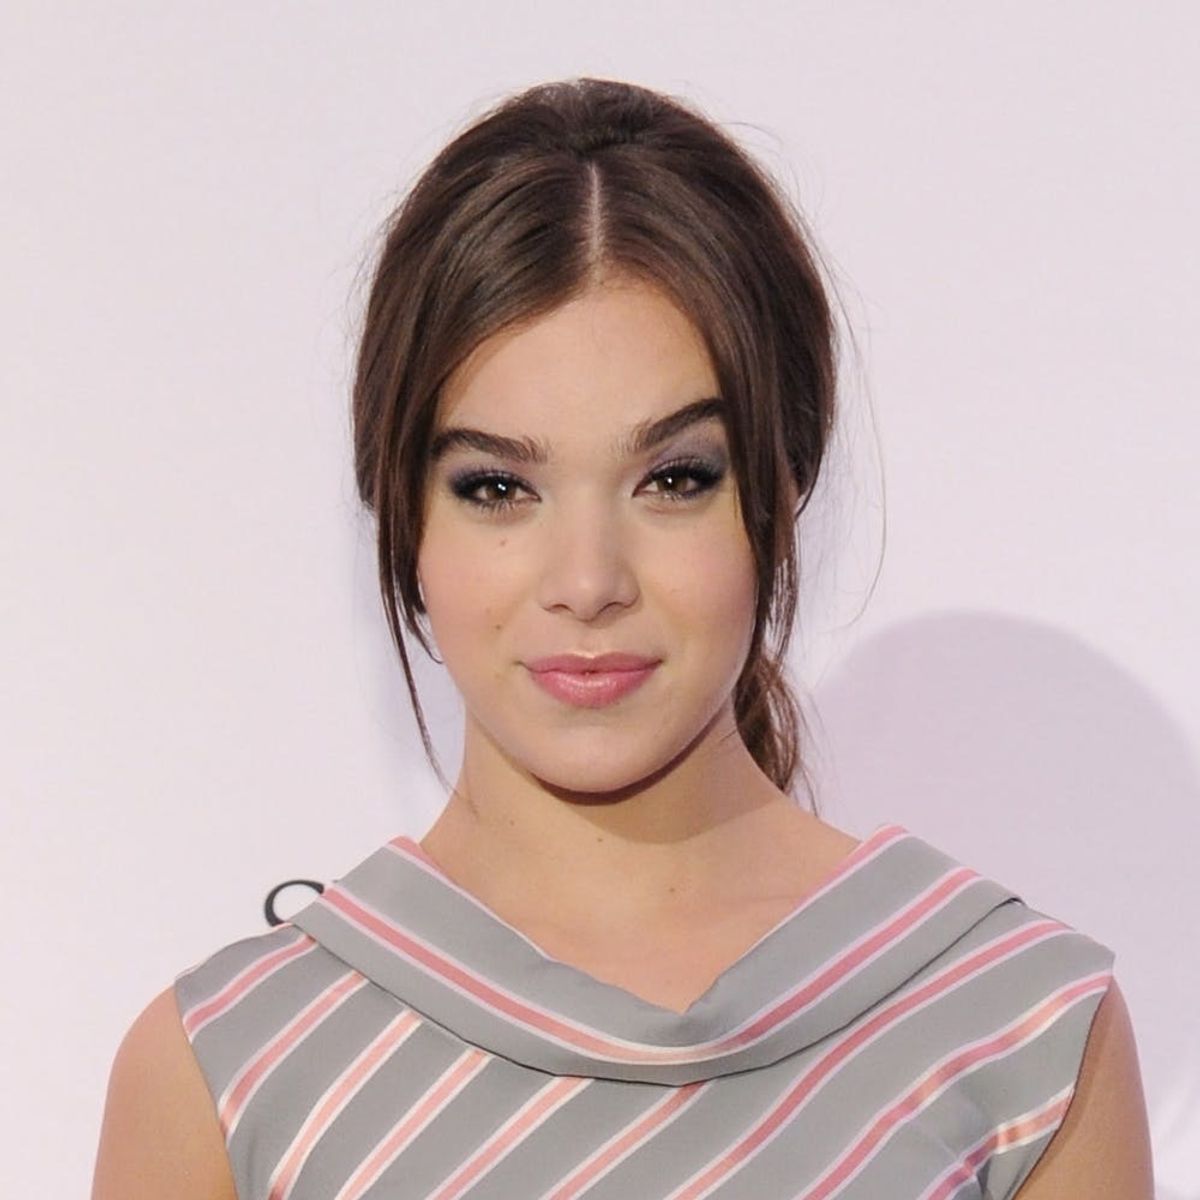 Hailee Steinfeld Just Revealed a Surprising Truth About Taylor Swift’s #GirlSquad